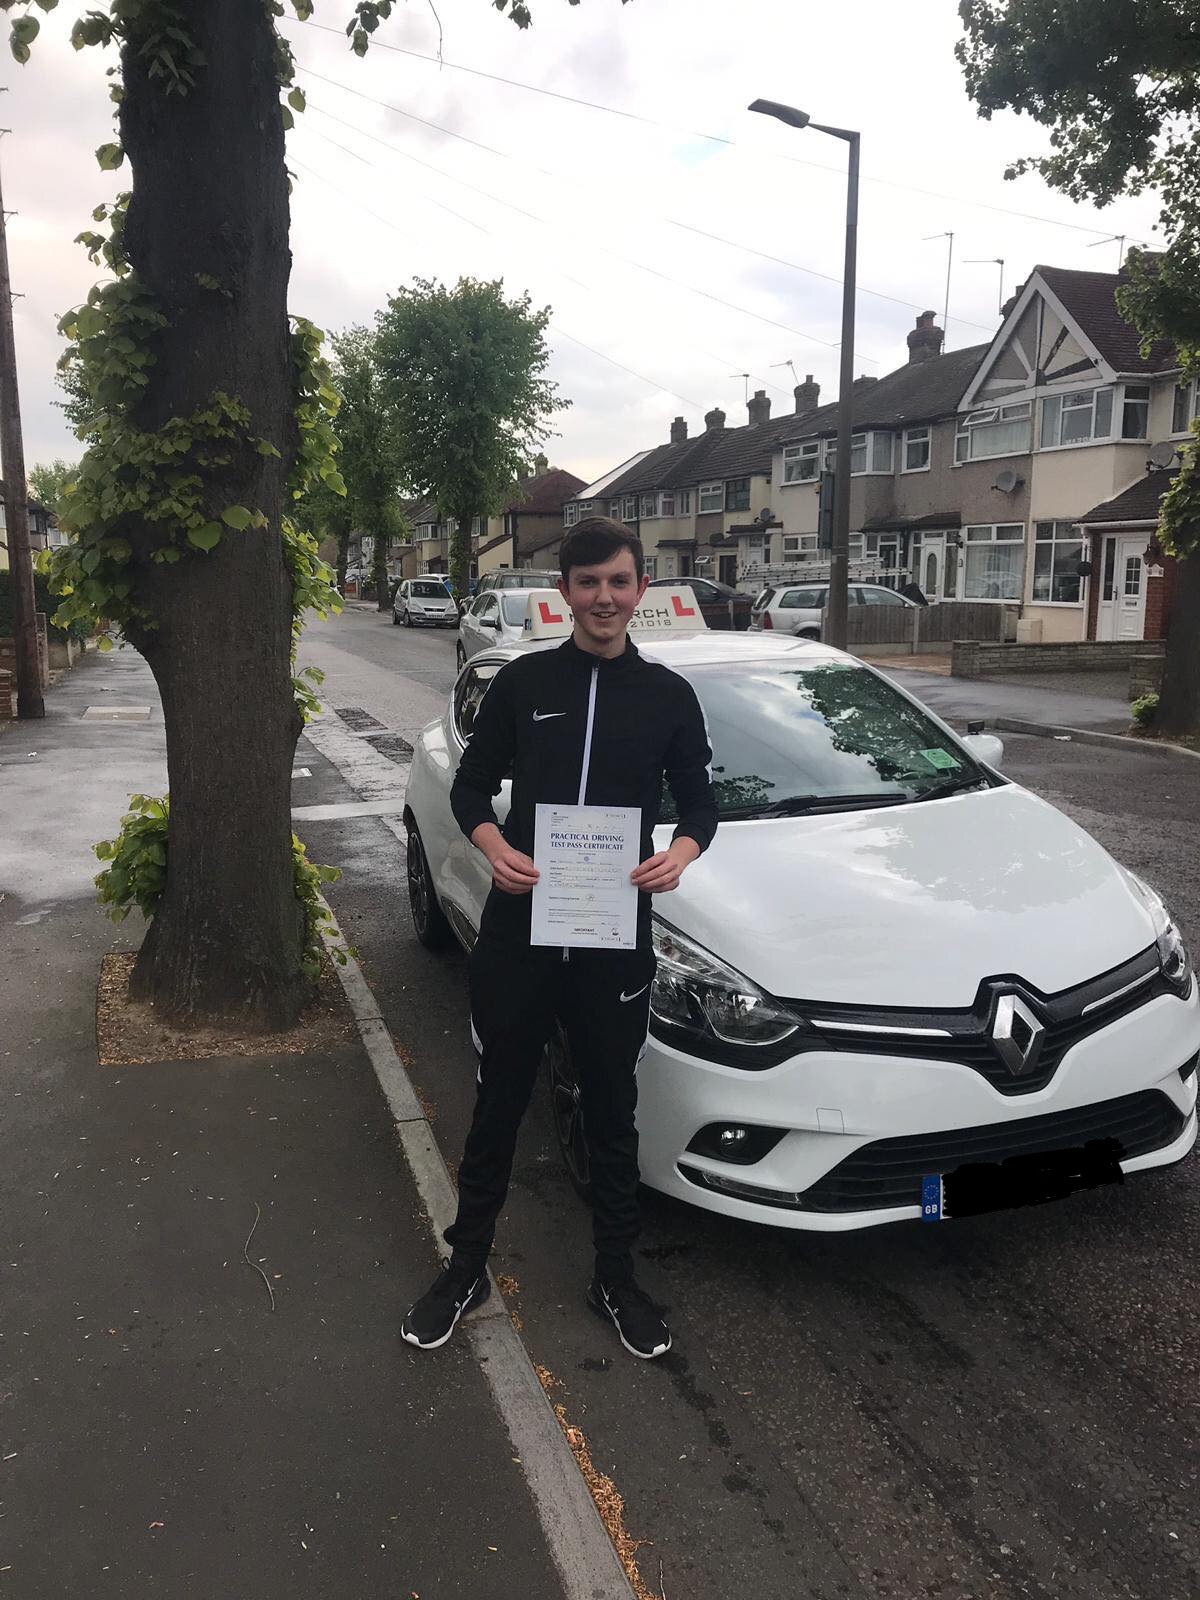 Pupil passed at Hornchurch driving test centre